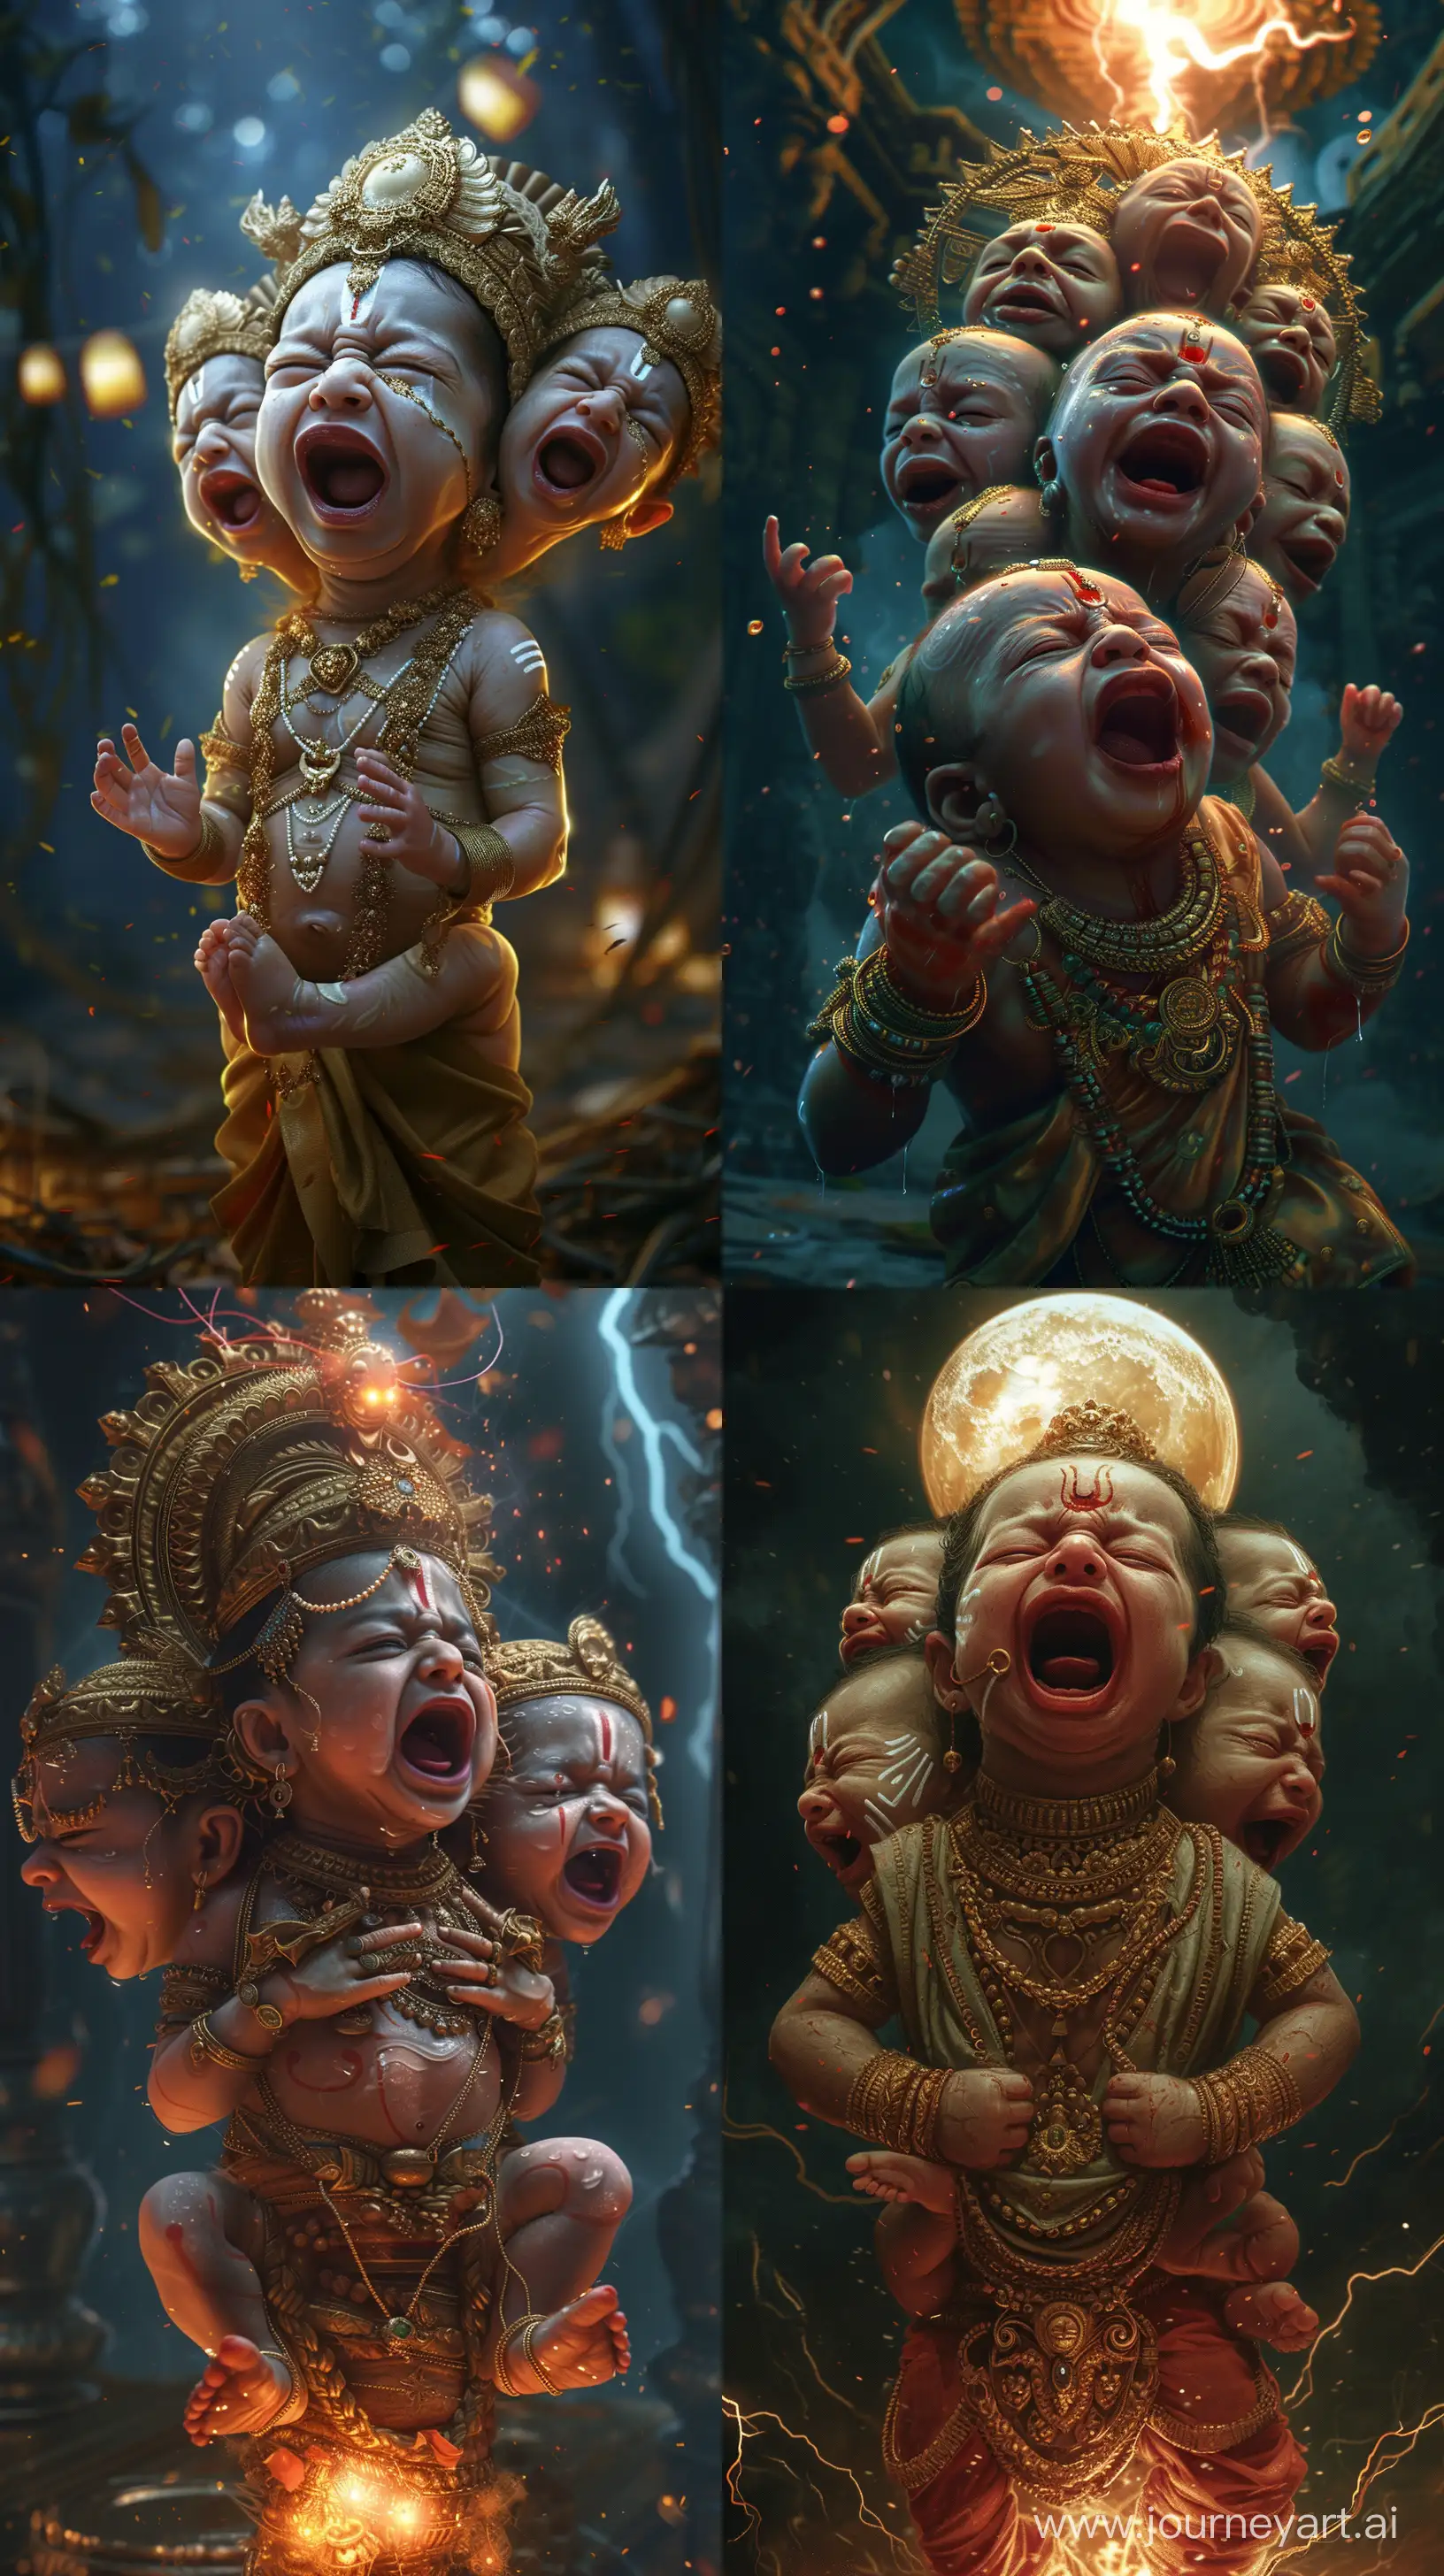 Ancient-Indian-Newborn-with-Multiple-Heads-Crying-at-Night-Realistic-UHD-Digital-Painting